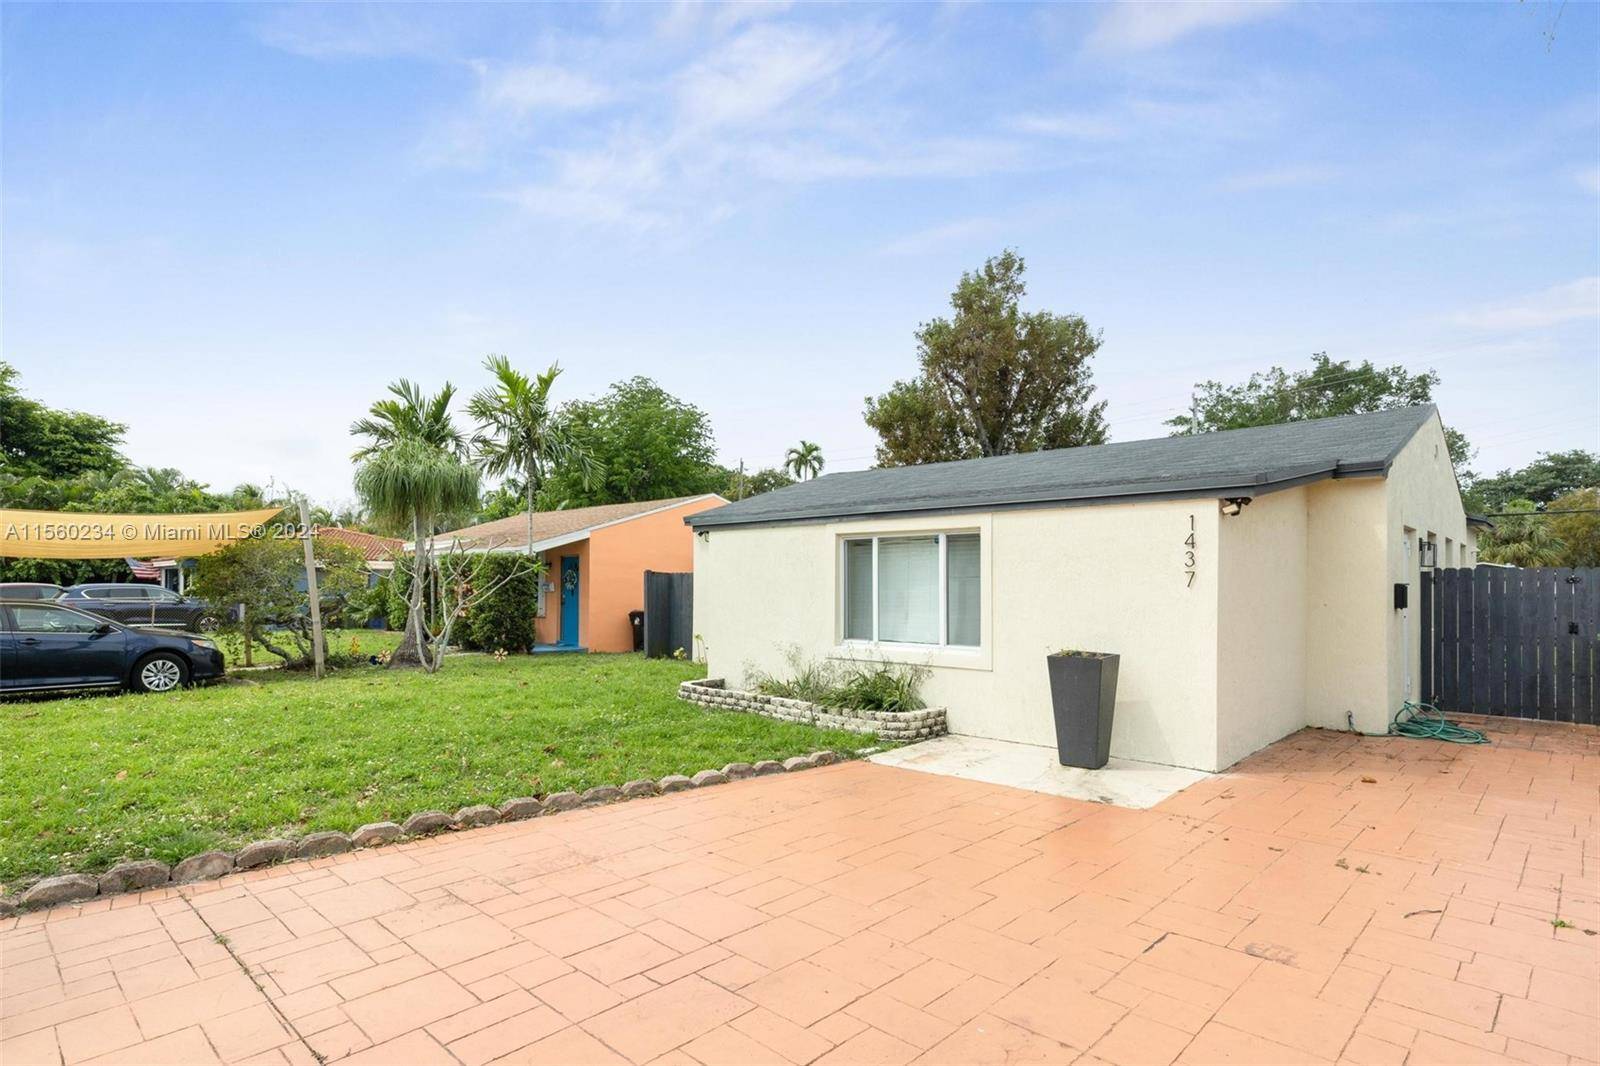 Completely updated 3 bedroom, 2 bath, Single Family Home in a desirable East Fort Lauderdale neighborhood.